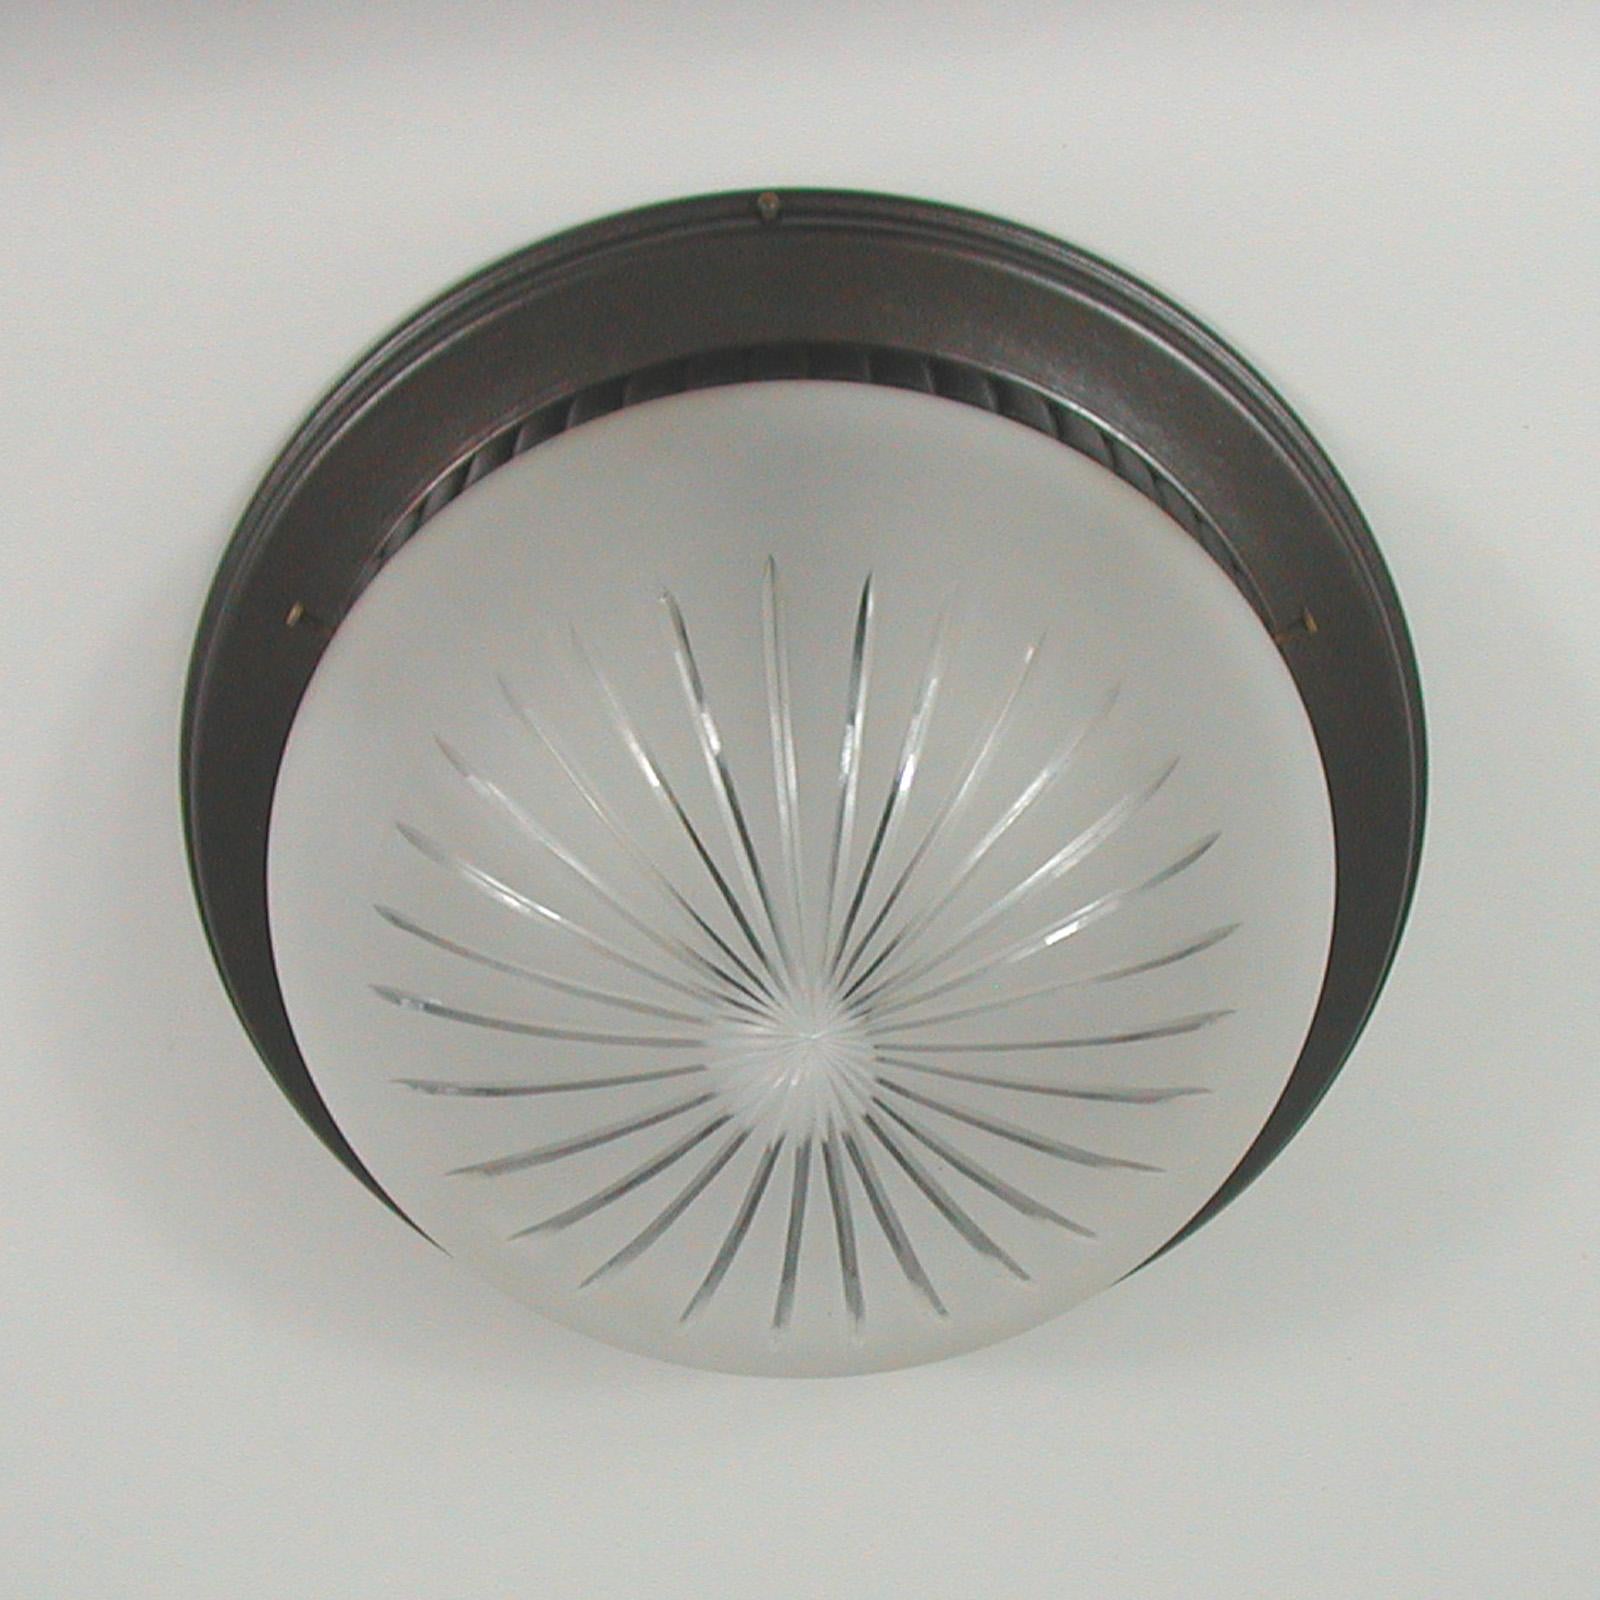 Art Deco Bronzed Metal and Satin Glass Flush Mount, Austria, 1910 to 1920 For Sale 5